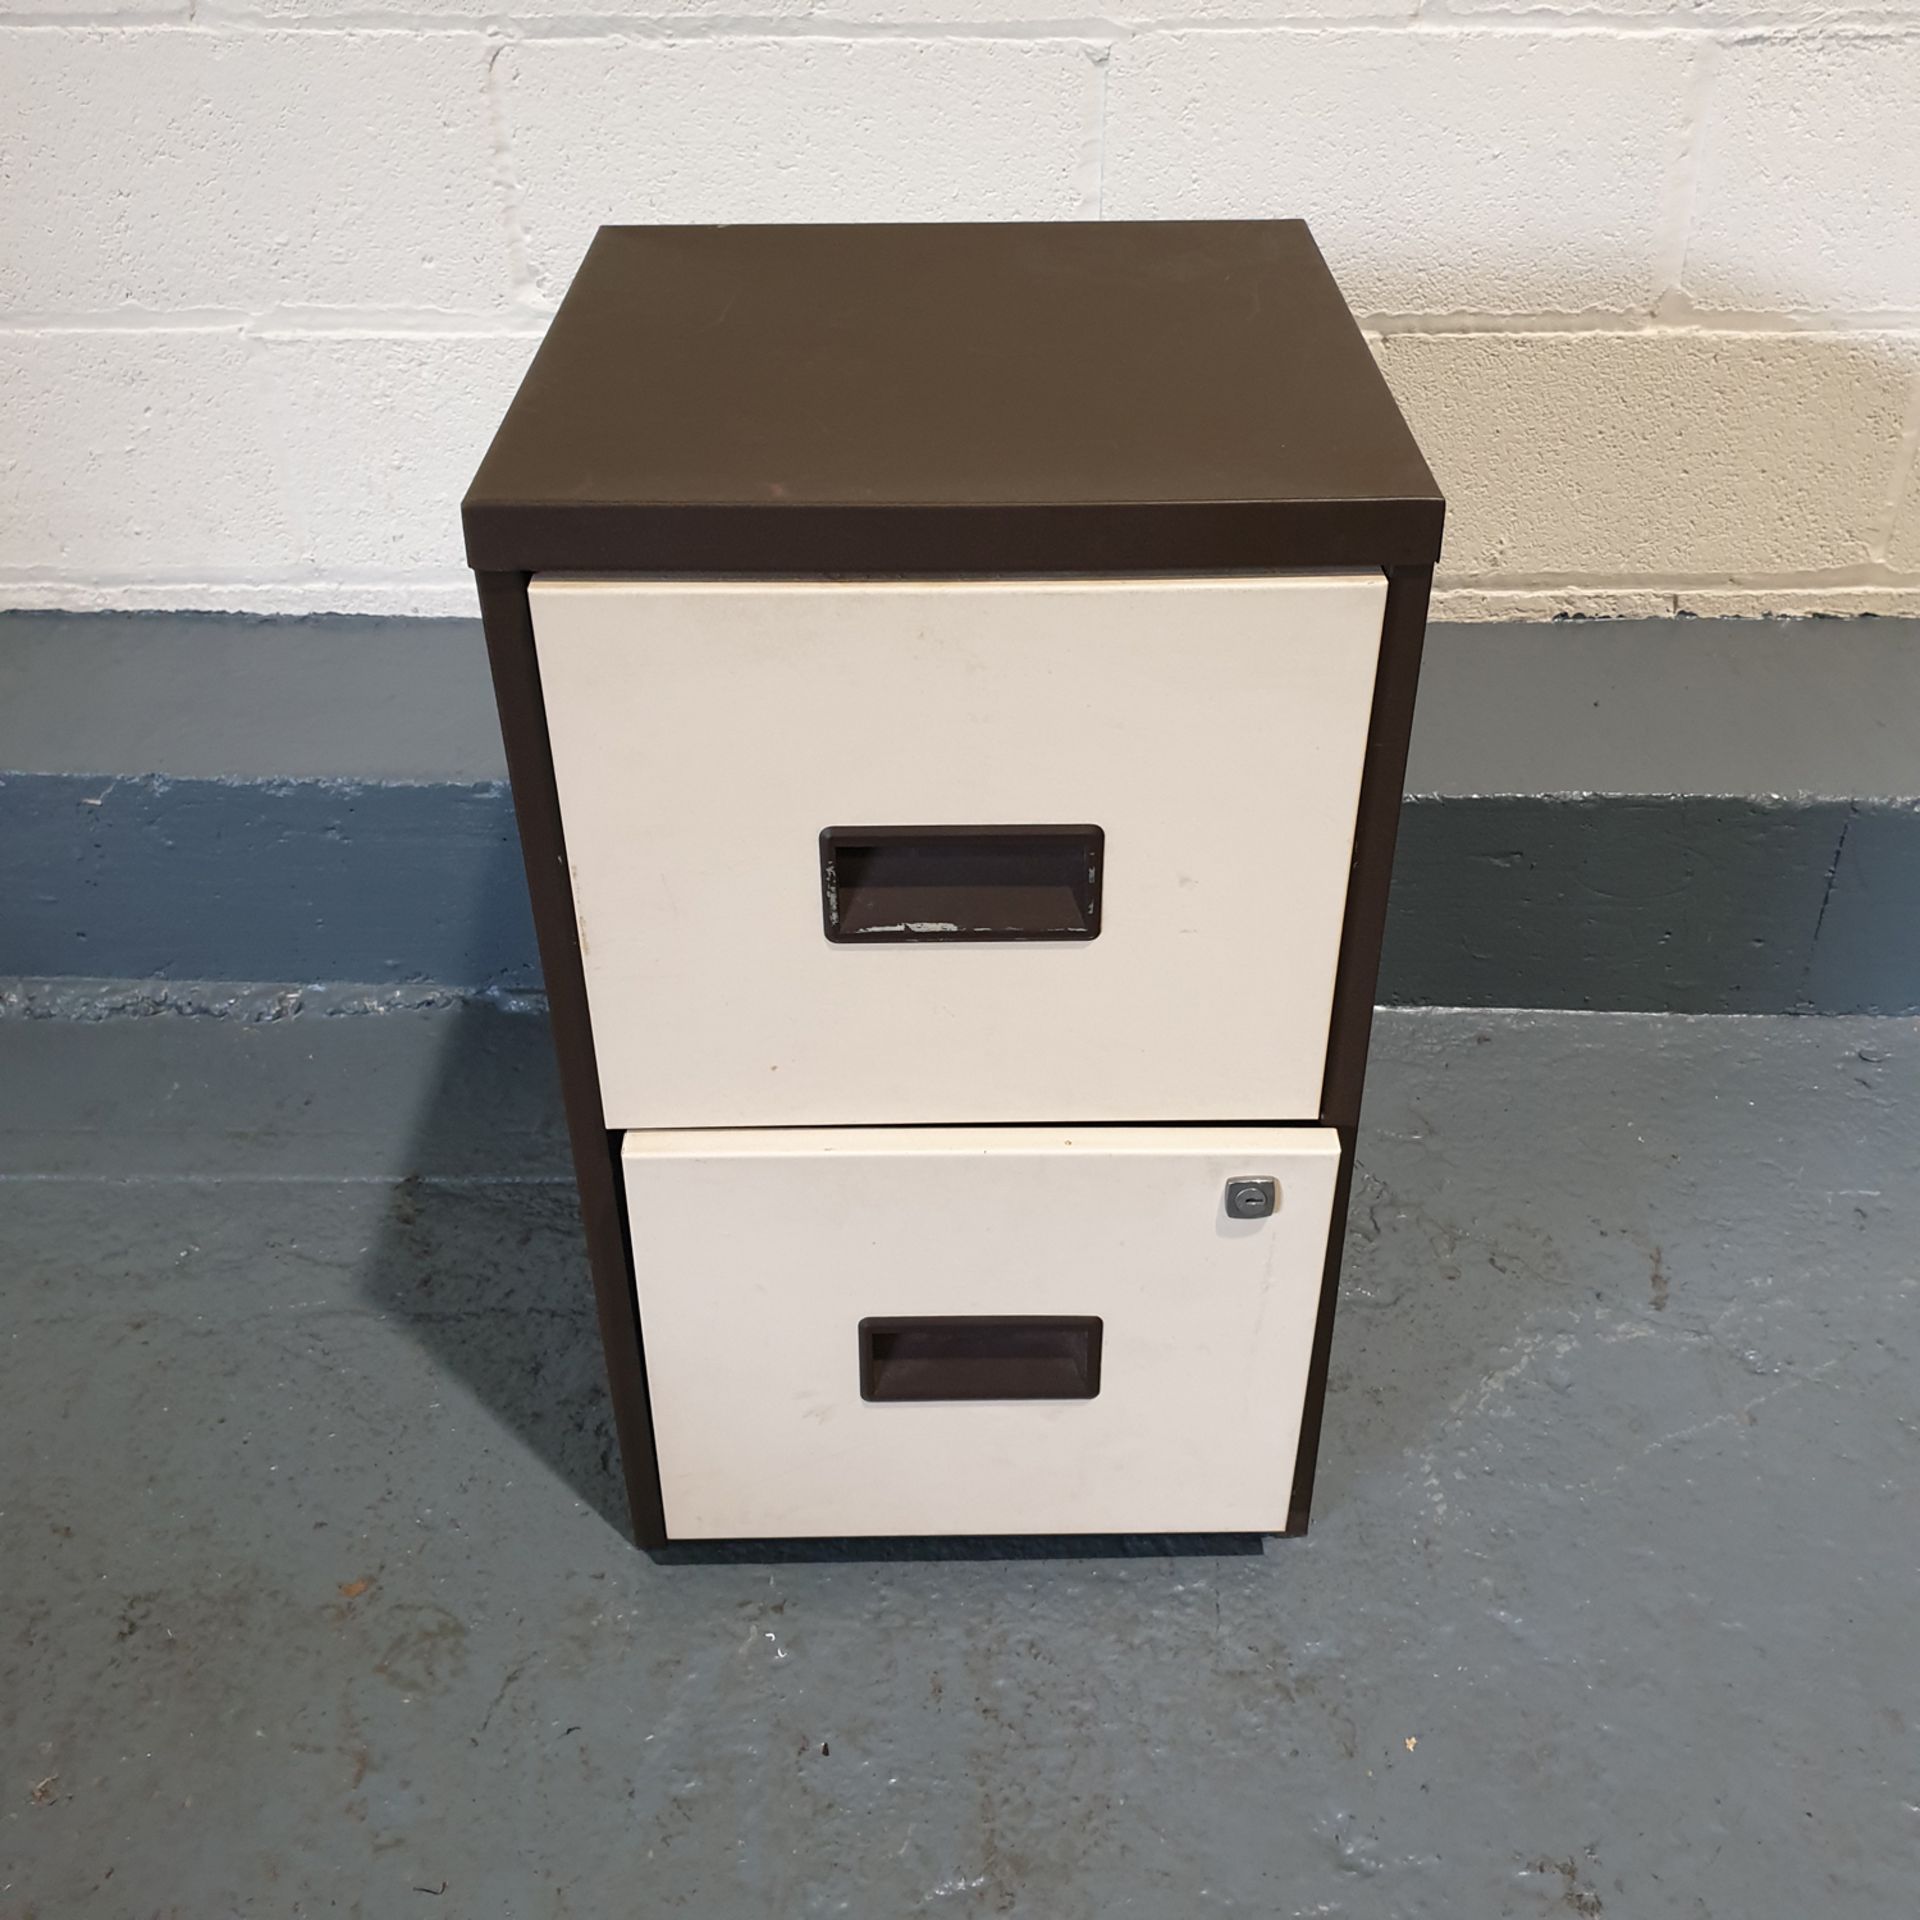 2 Drawer Filling Cabinet. No Key. Approx Dimensions 400mm x 400mm x 660mm High.